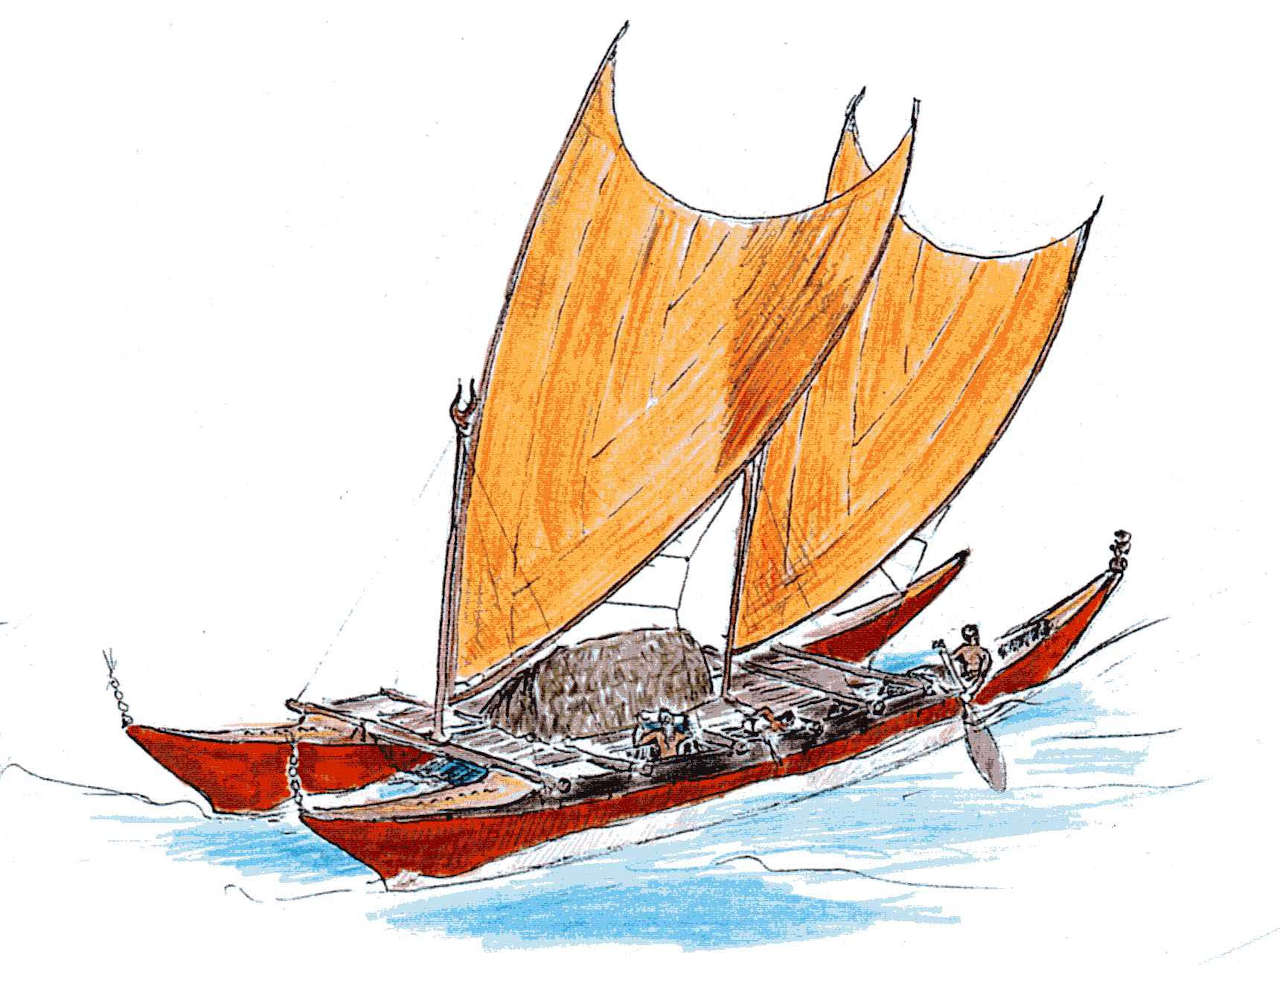 Drawing of a double canoe with a crabclaw sail